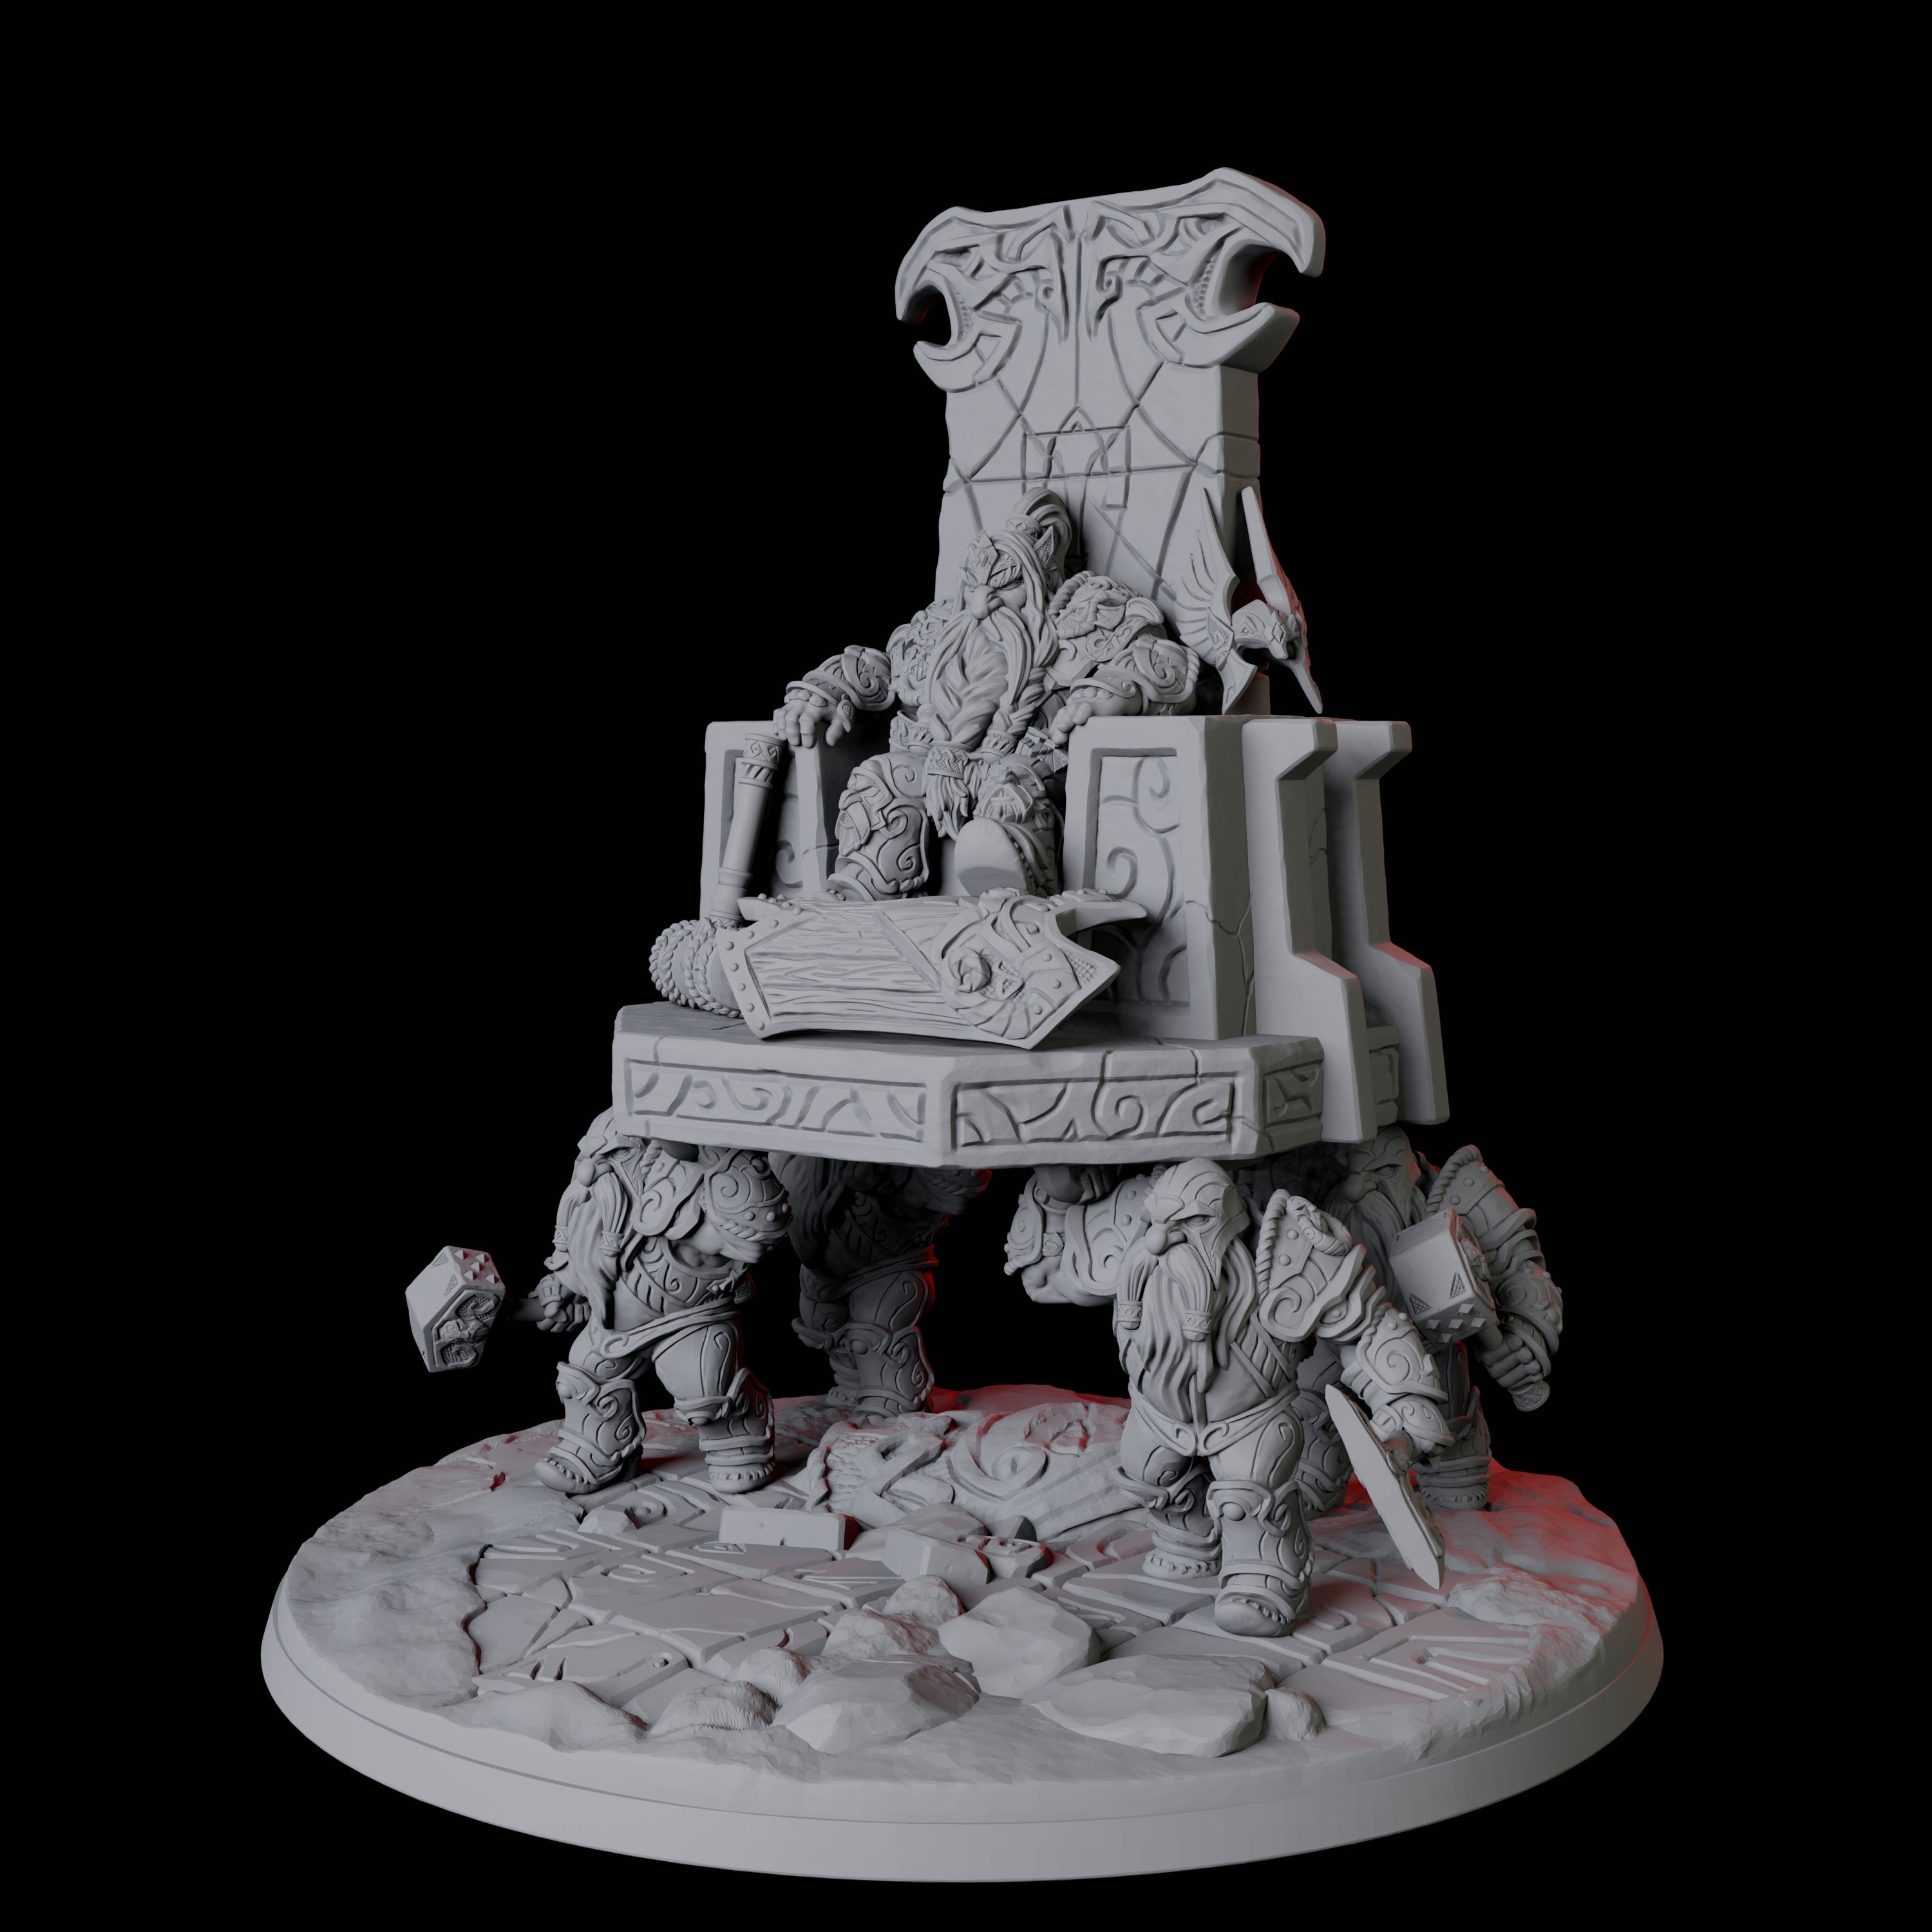 Mountain King Miniature for Dungeons and Dragons, Pathfinder or other TTRPGs